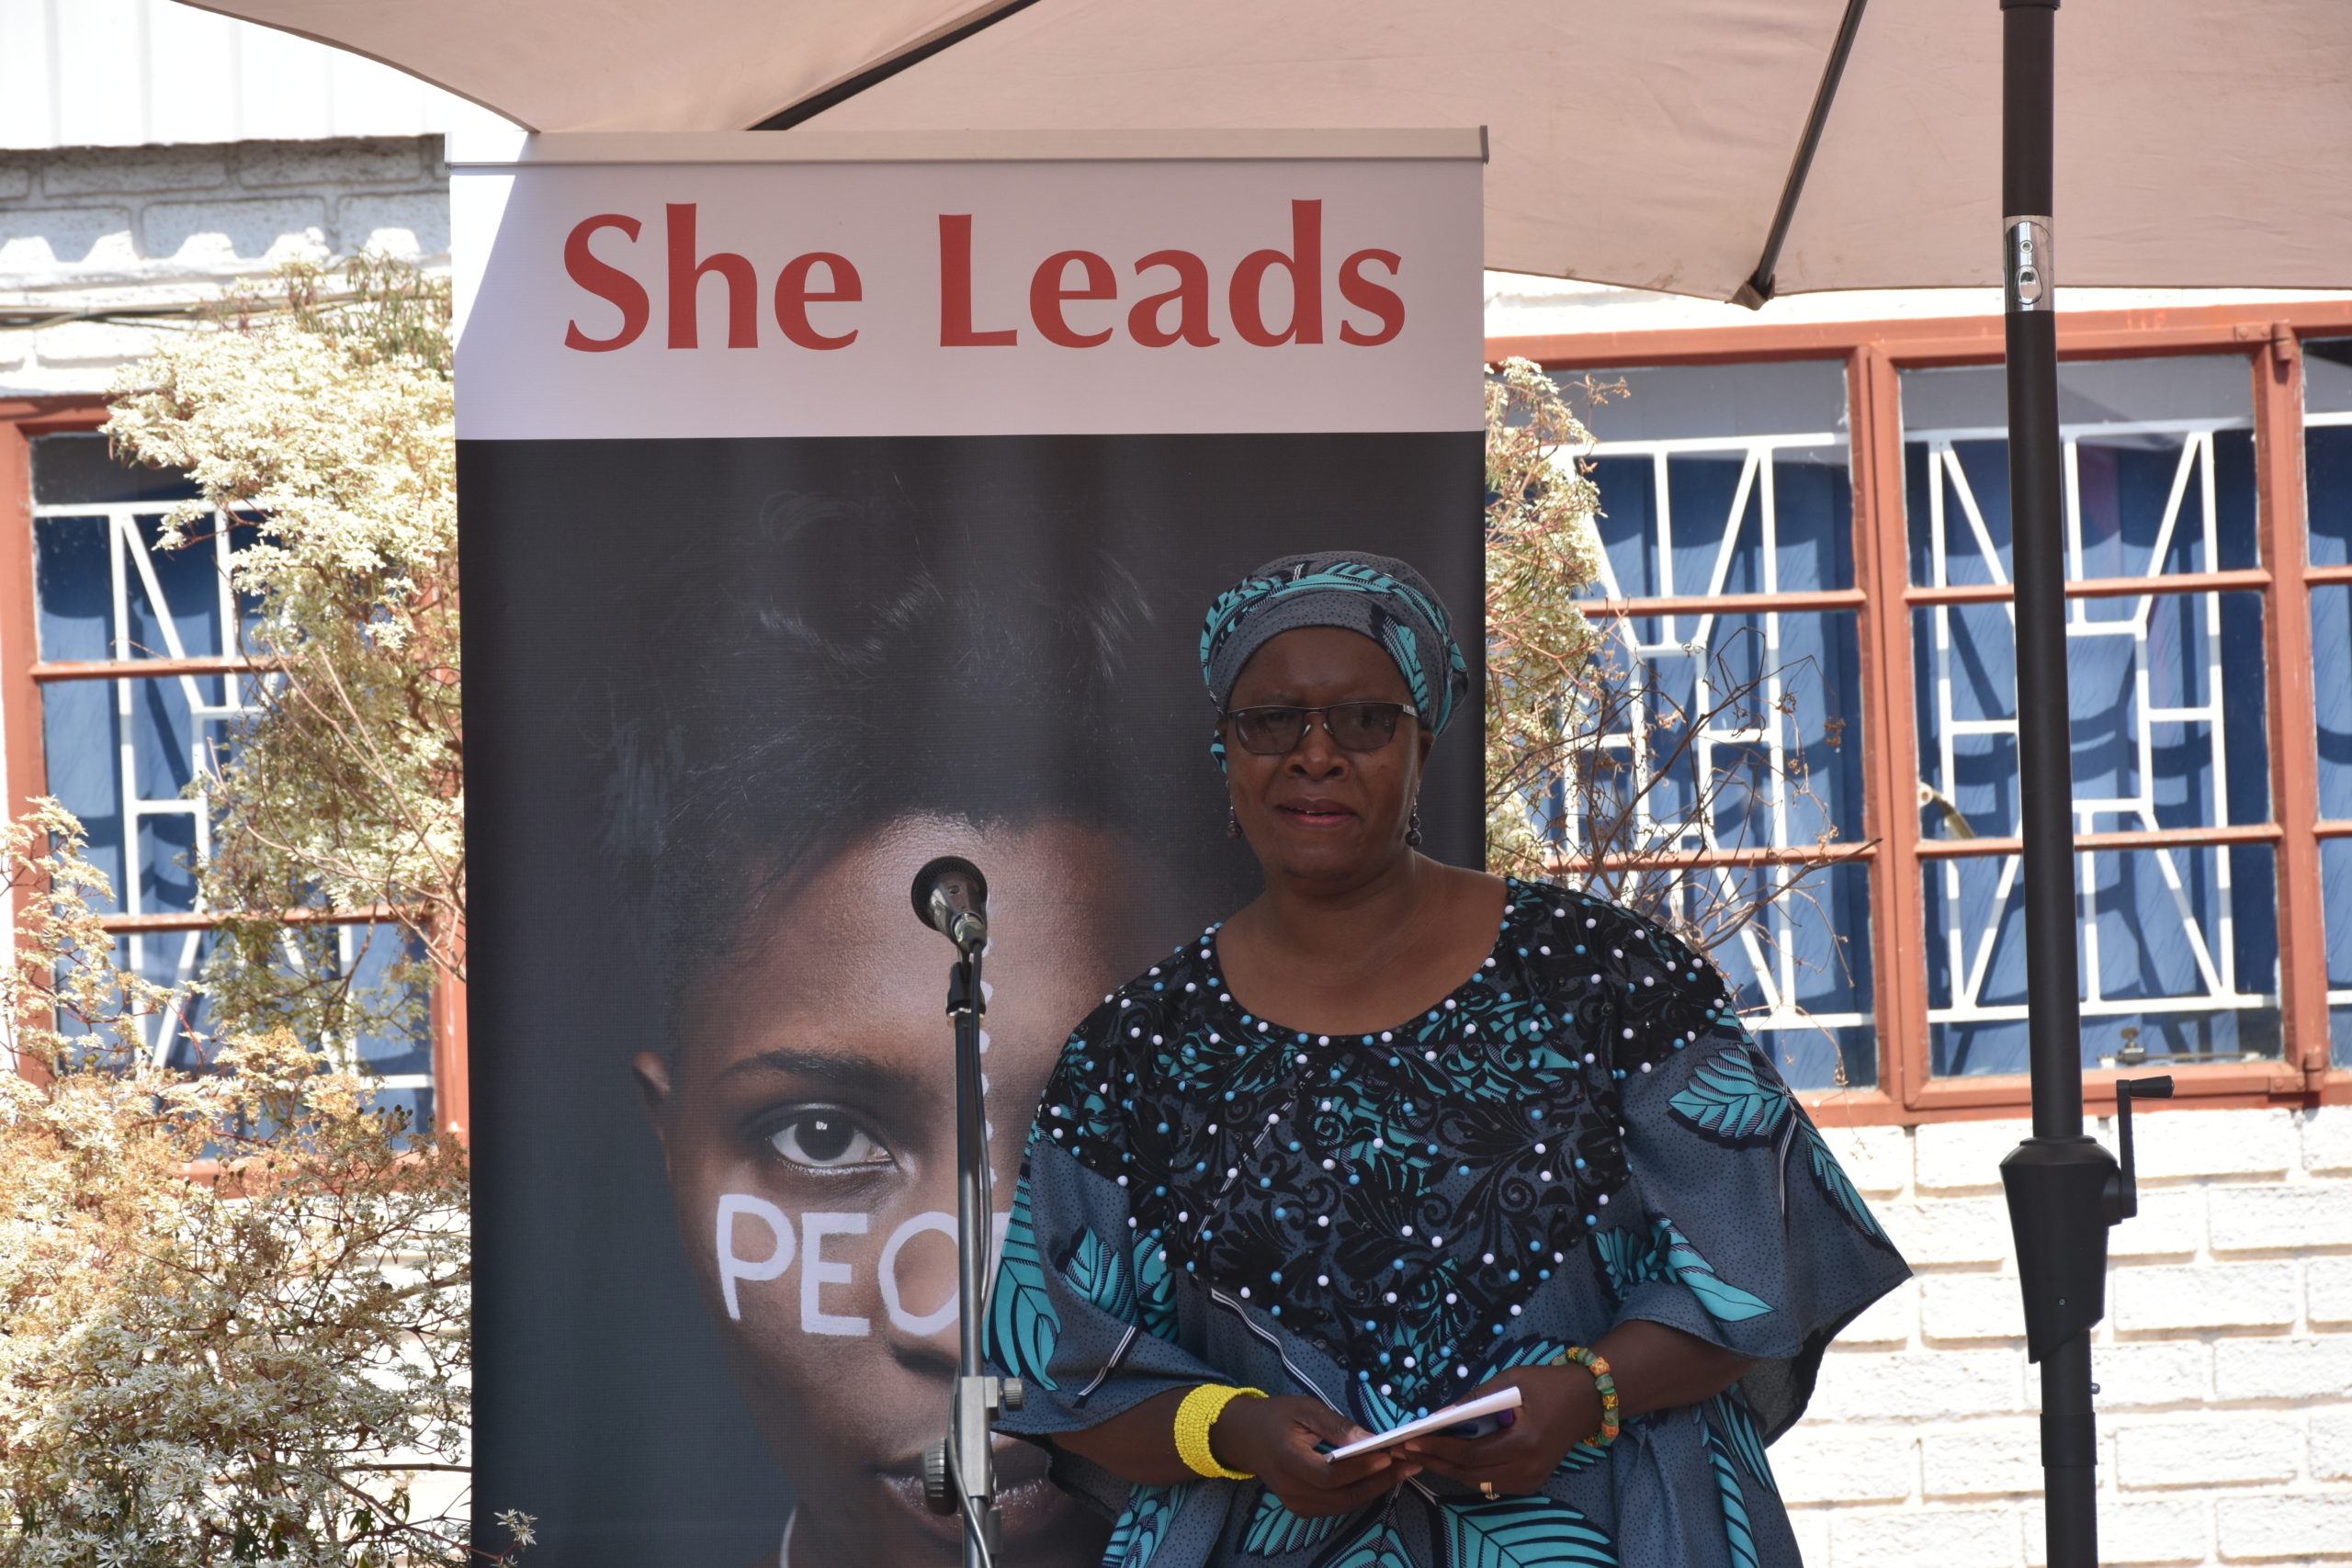 Hivos launches She Leads project to promote full and effective participation of women in political and societal decision-making processes